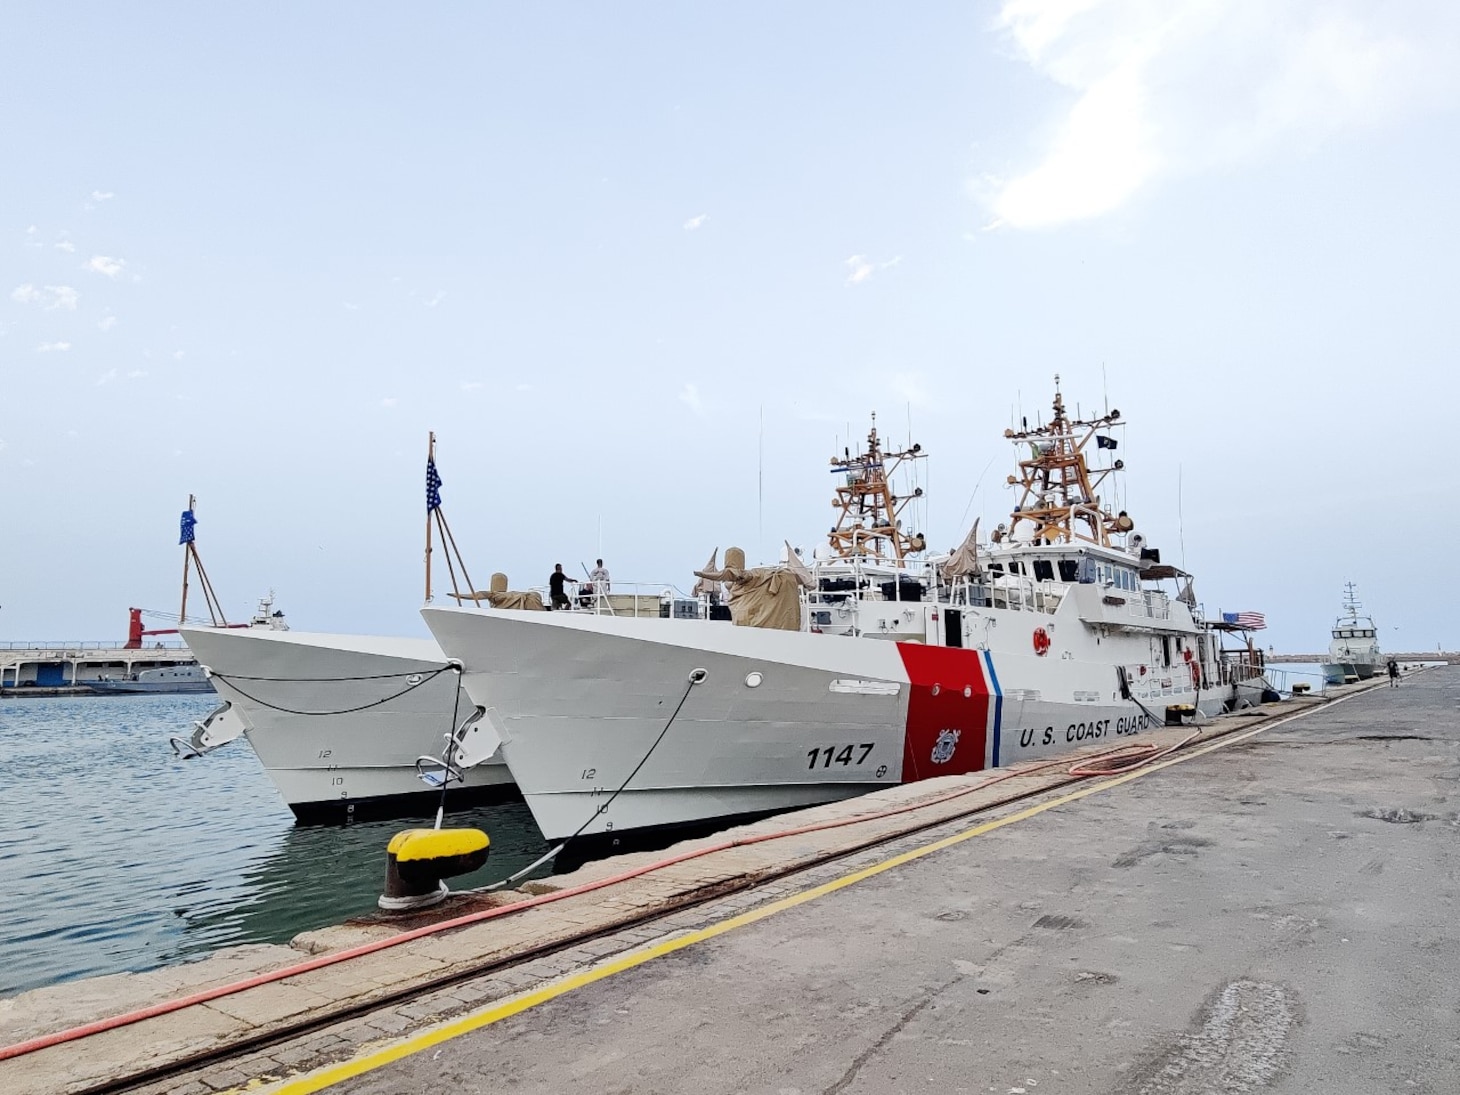 The U.S. Coast Guard Sentinel-class fast response cutters USCGC Clarence Sutphin Jr. (WPC 1147), right, and USCGC John Scheuerman (WPC 1146) moor in Algiers, Algeria during a scheduled port visit, July 6, 2022.